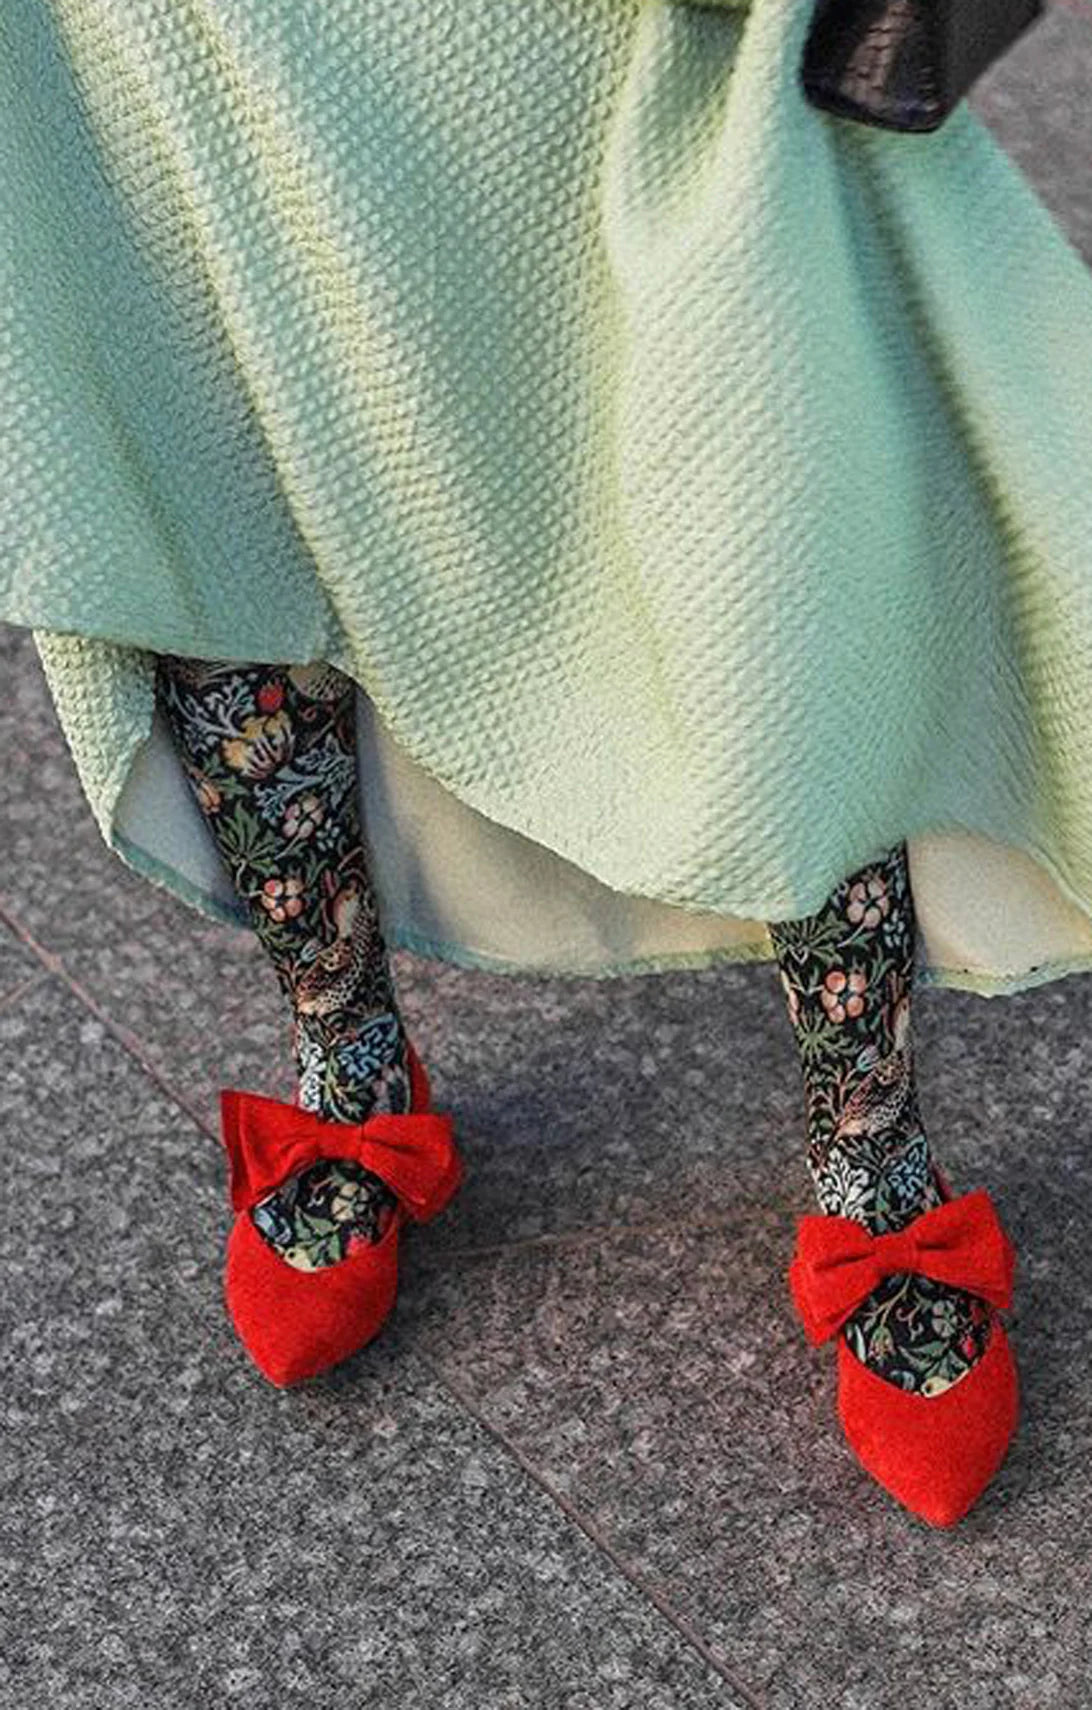 Tabbisocks STRAWBERRY THIEF by Wiiliam Morris Printed Art Tights on a woman's leg with a light green skirt t and red k shoes